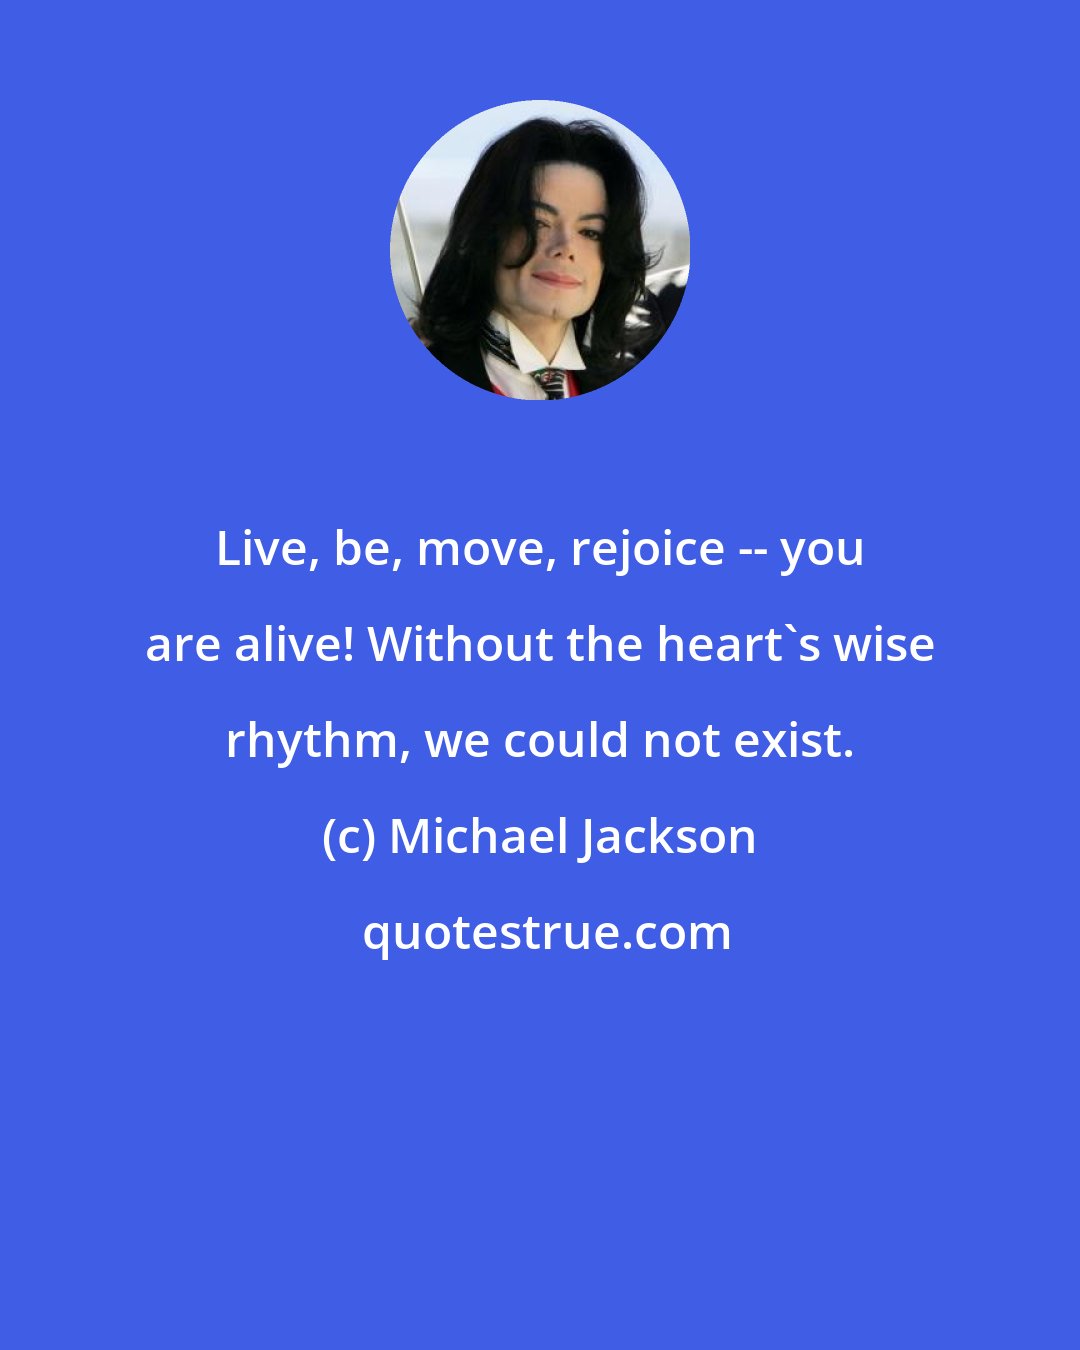 Michael Jackson: Live, be, move, rejoice -- you are alive! Without the heart's wise rhythm, we could not exist.